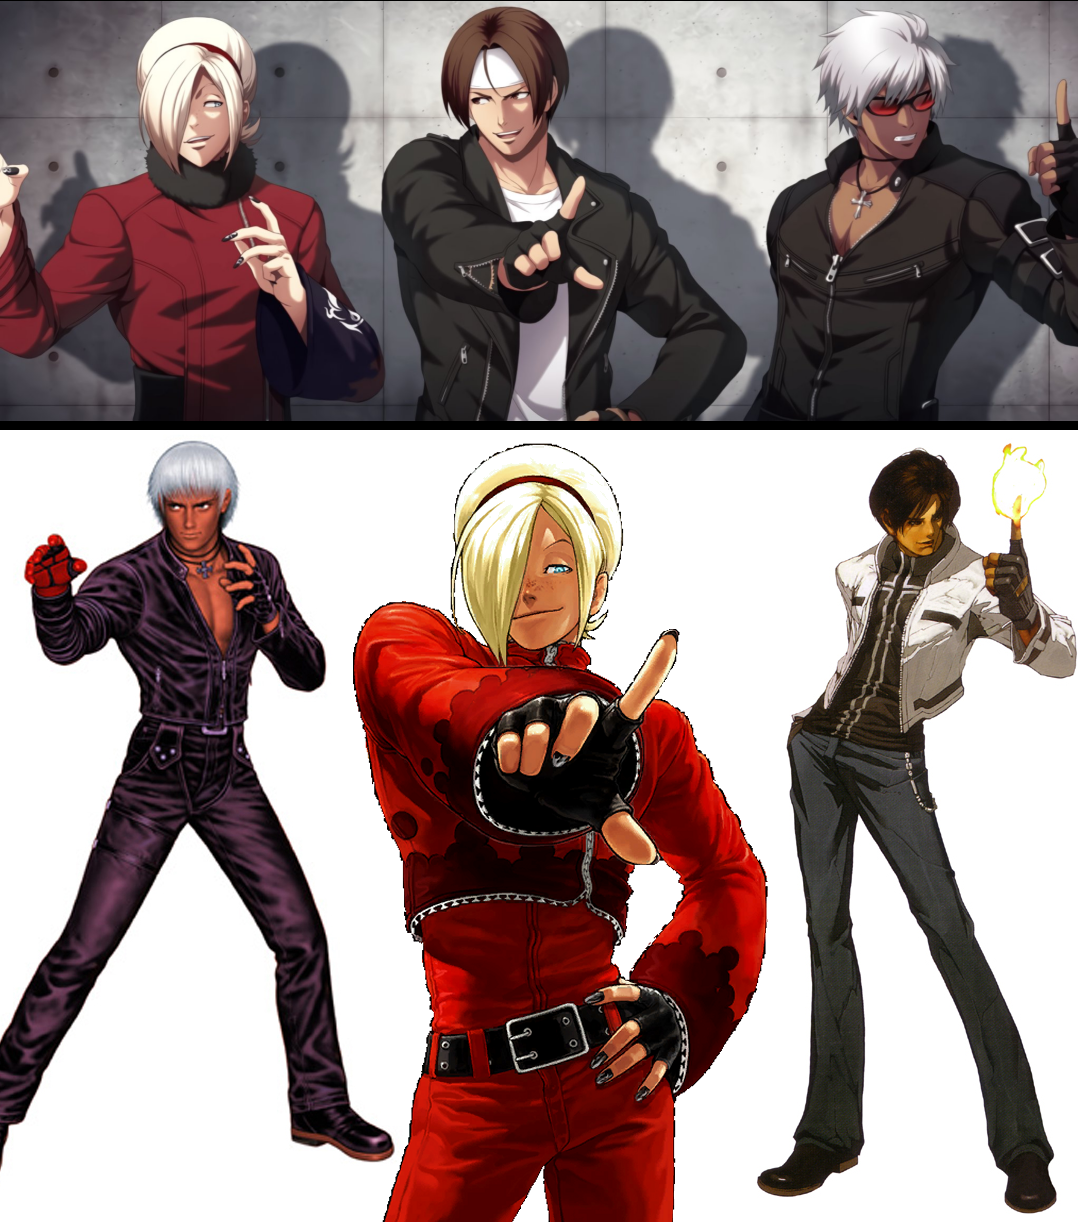 King of Fighters XV: All Hidden Special Teams in the Game